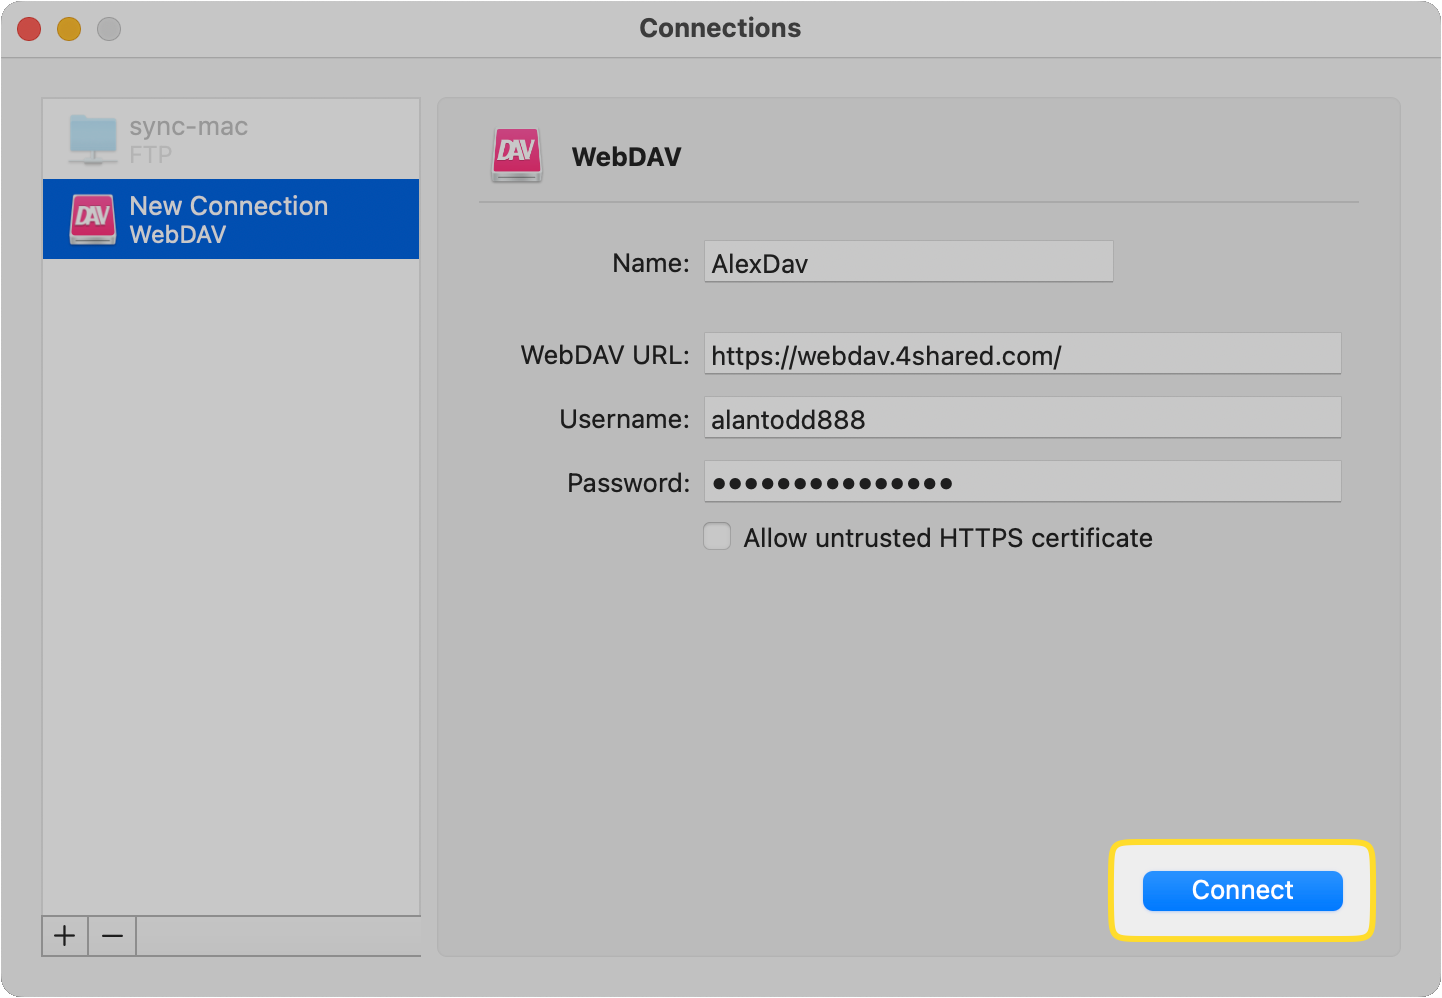 The Connect button of the new WebDAV connection is outlined